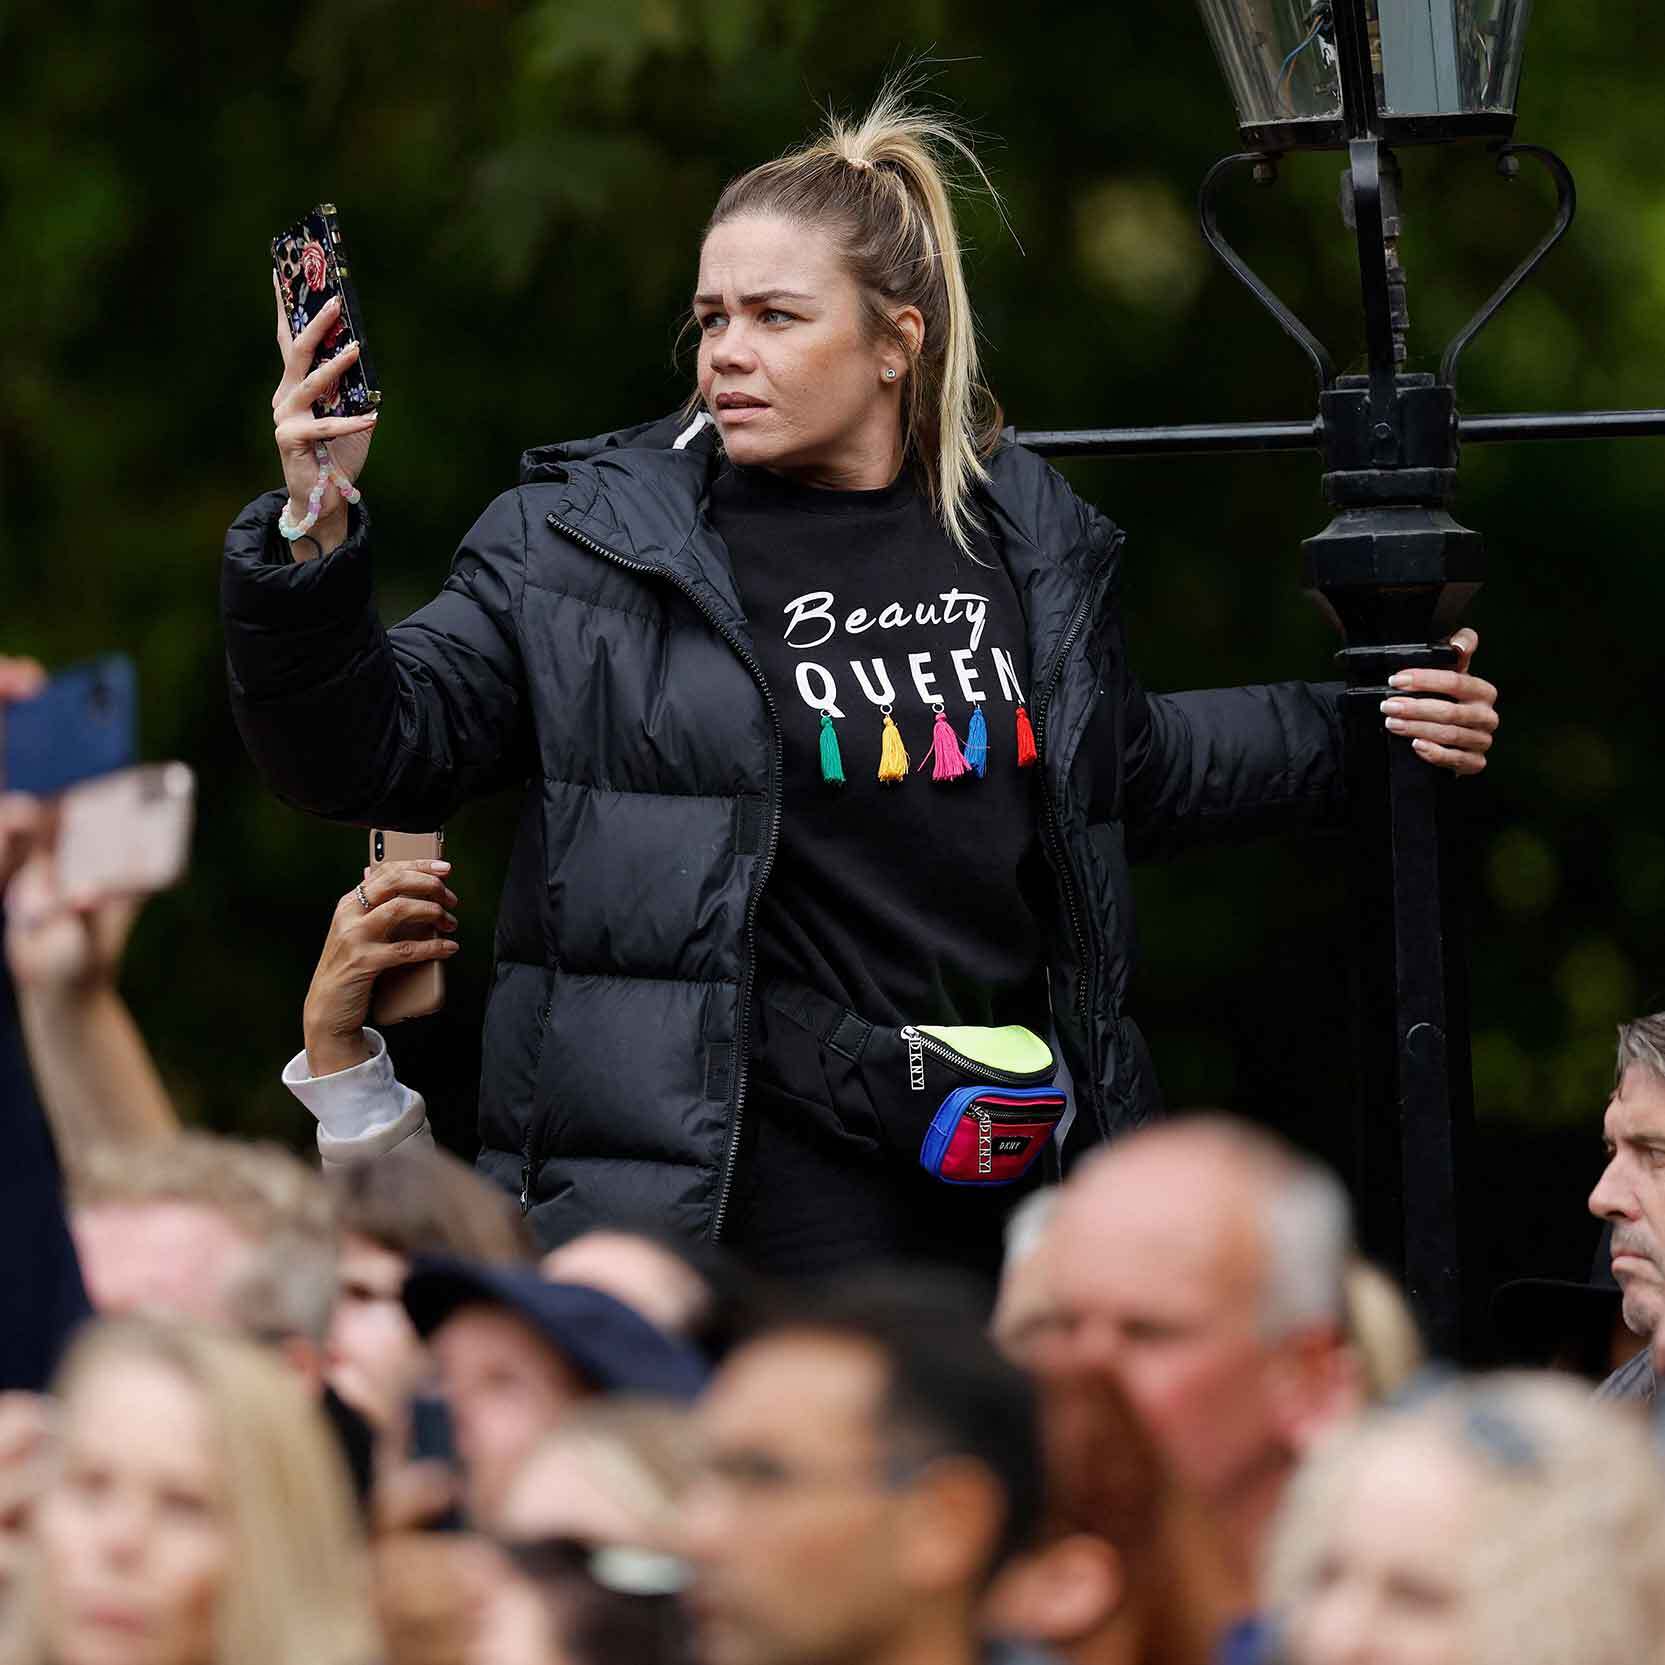 A woman hangs on to a lamppost while trying to take a picture of the procession